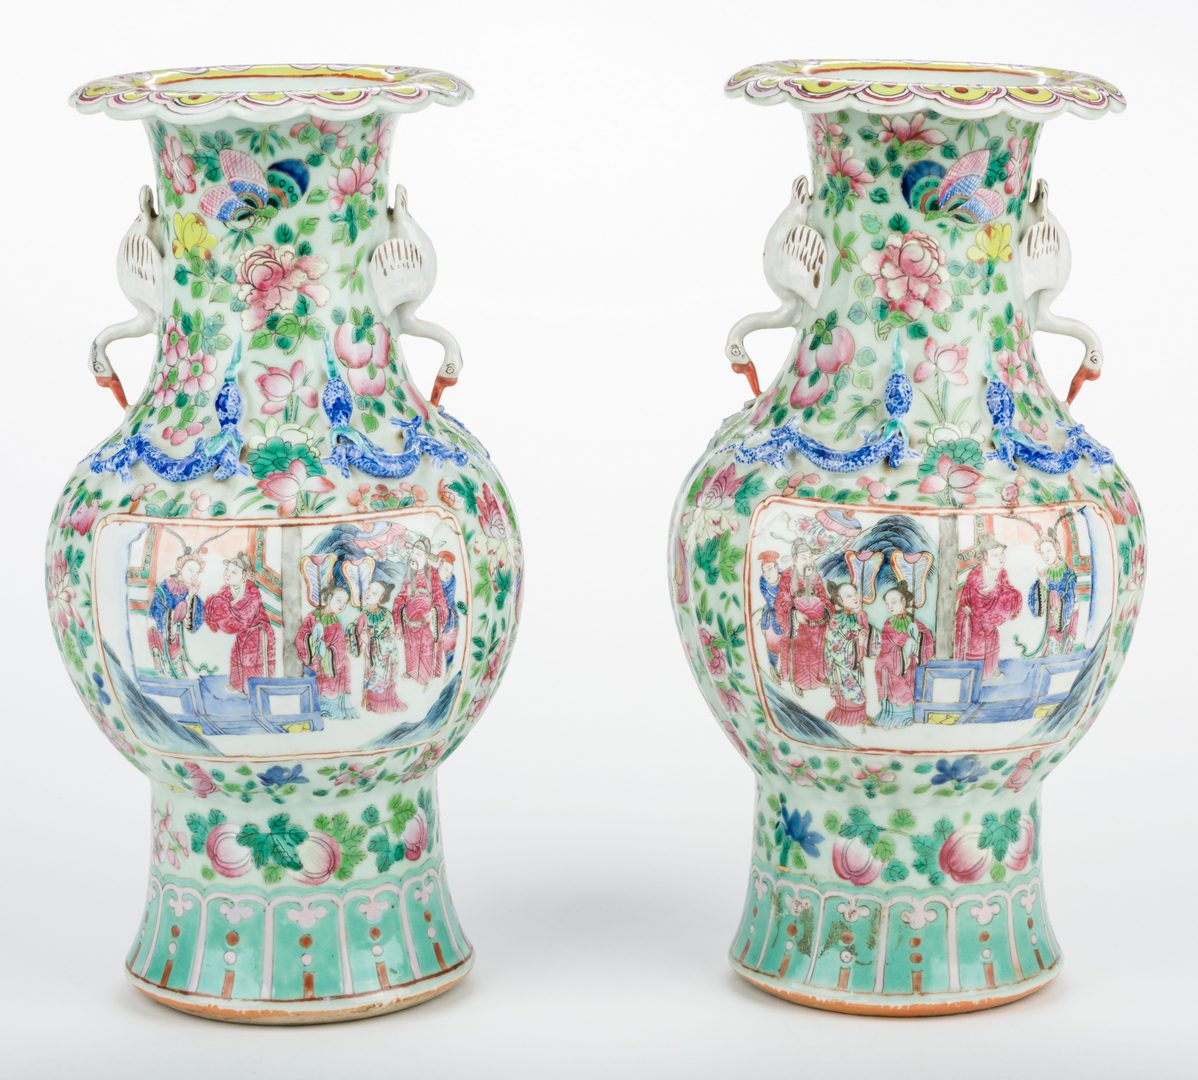 Lot 16: Pr. Chinese Famille Rose Vases w/ Figural Handles